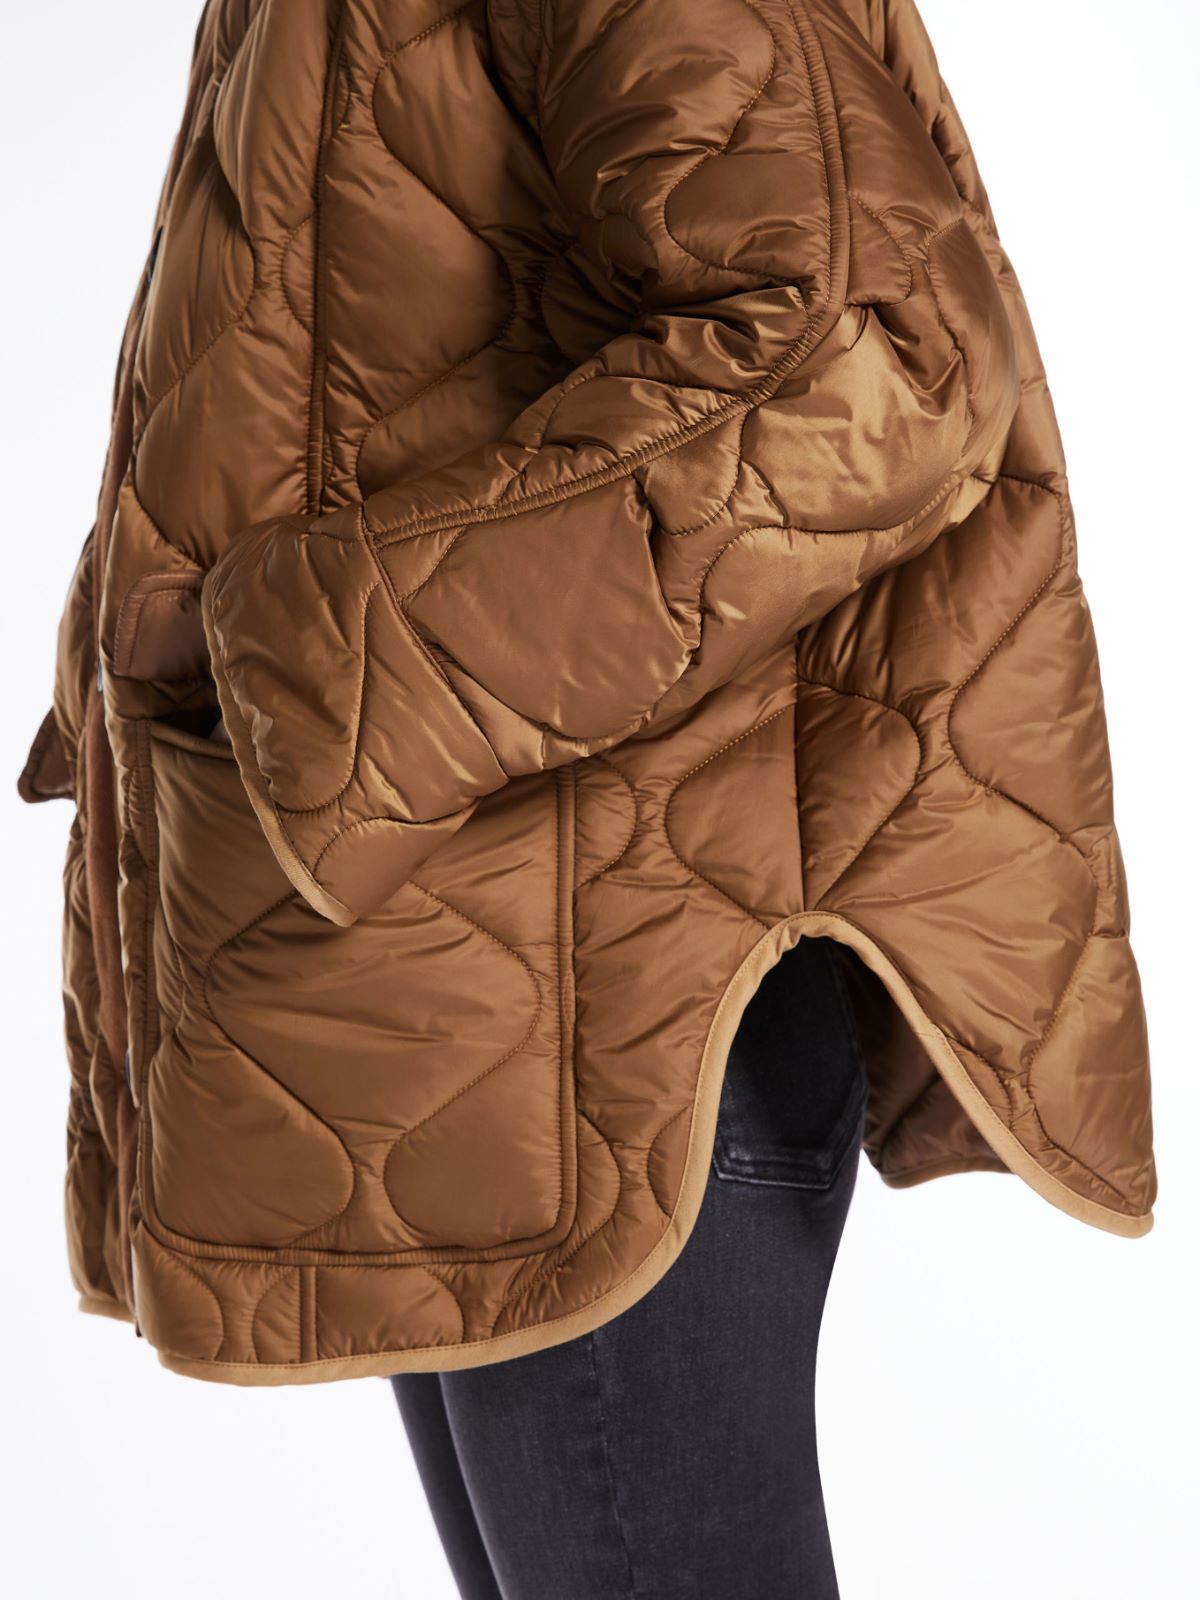 Water-repellent fabric quilted jacket - CARAMEL - Weekend Max Mara - 4